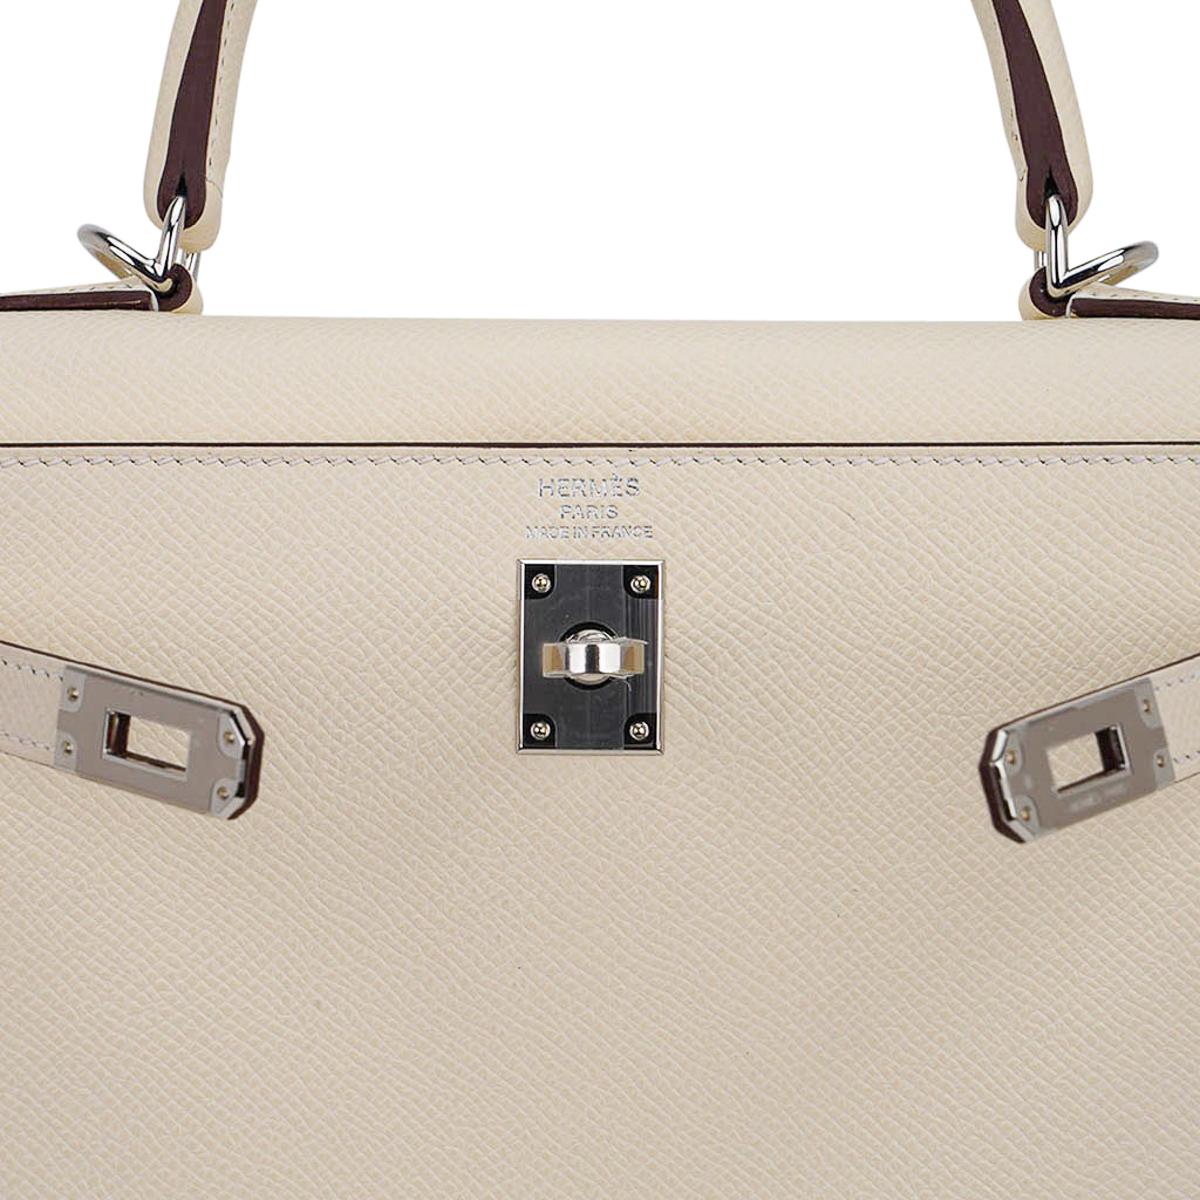 Hermes Kelly 25 Sellier Bag Nata Palladium Hardware Epsom Leather In New Condition For Sale In Miami, FL